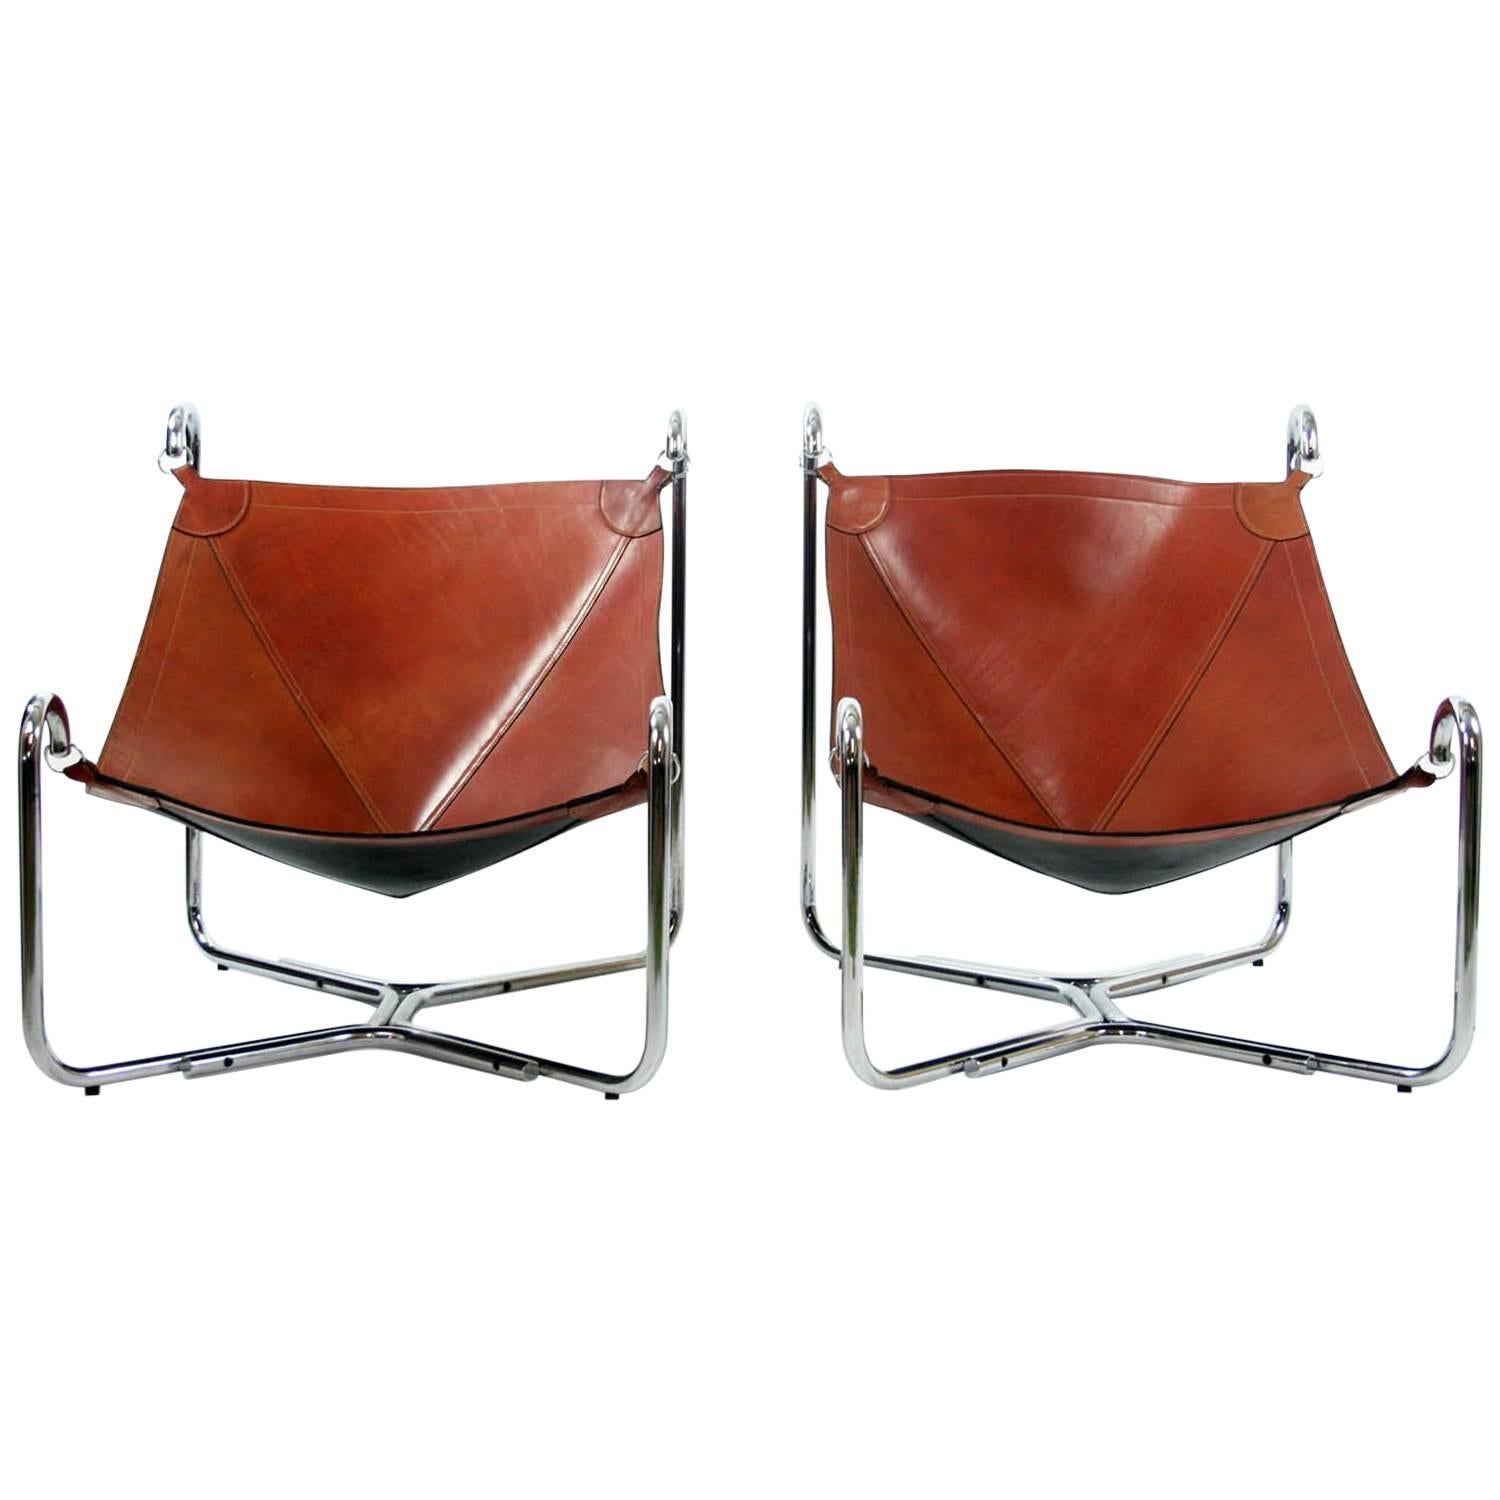 Gianni Pareschi and Ezio Didone Baffo Lounge Chairs for Busnelli, Italy, 1969 For Sale